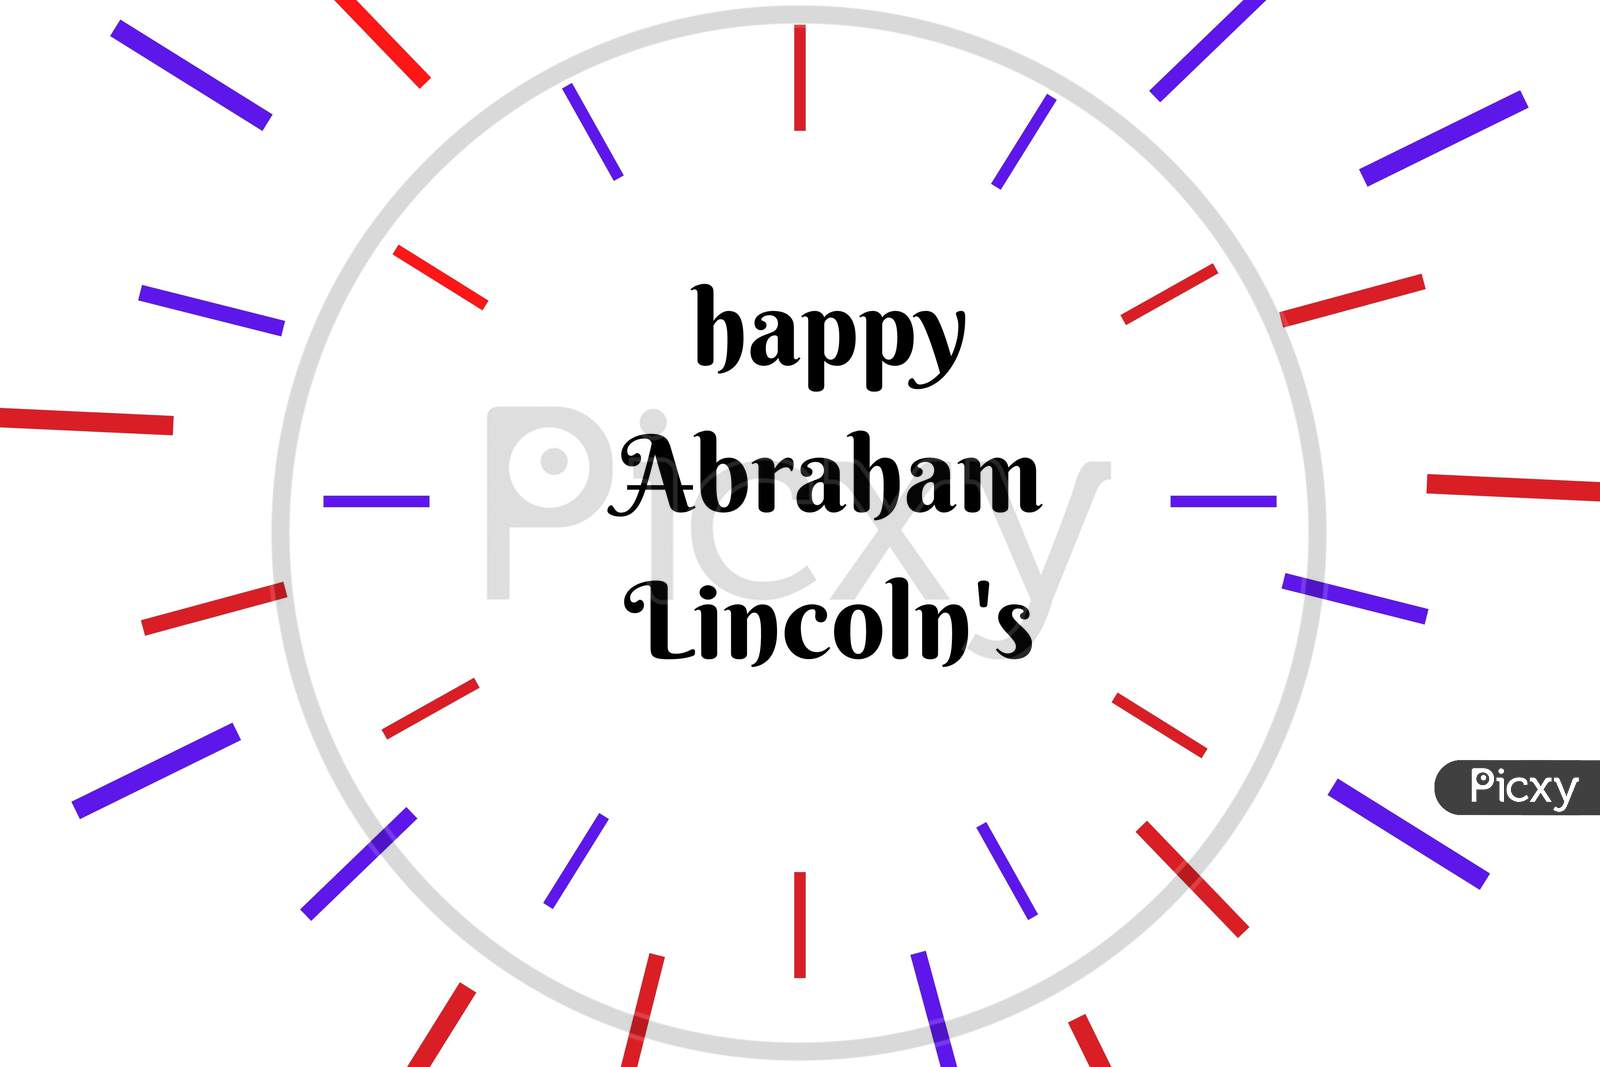 Abraham Lincoln’S Birthday. Text With Red And Blue Element . National Holiday In The United States. Poster, Banner And Background . Birthday Of One Of The Most Popular Presidents Of America.